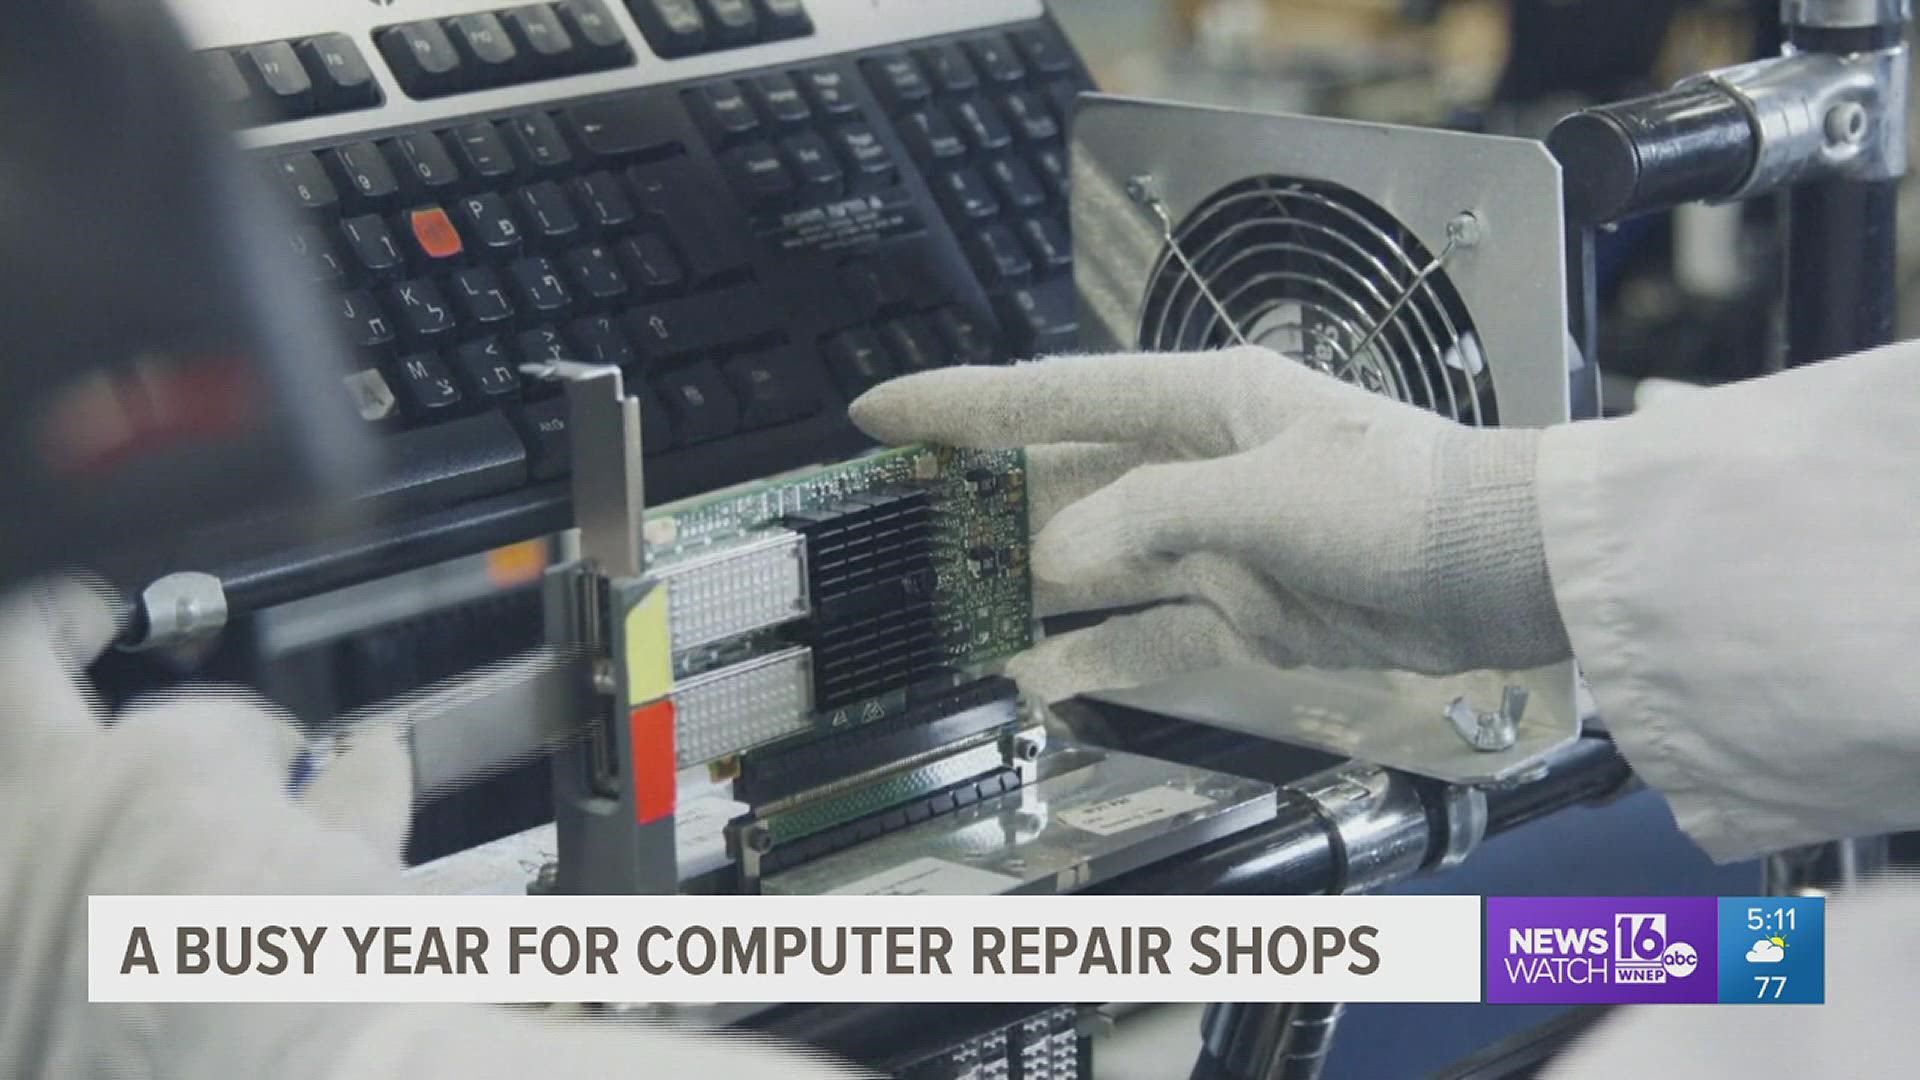 Business has picked up at computer repair shops in the past year as more and more people relied on their devices to work and go to school.